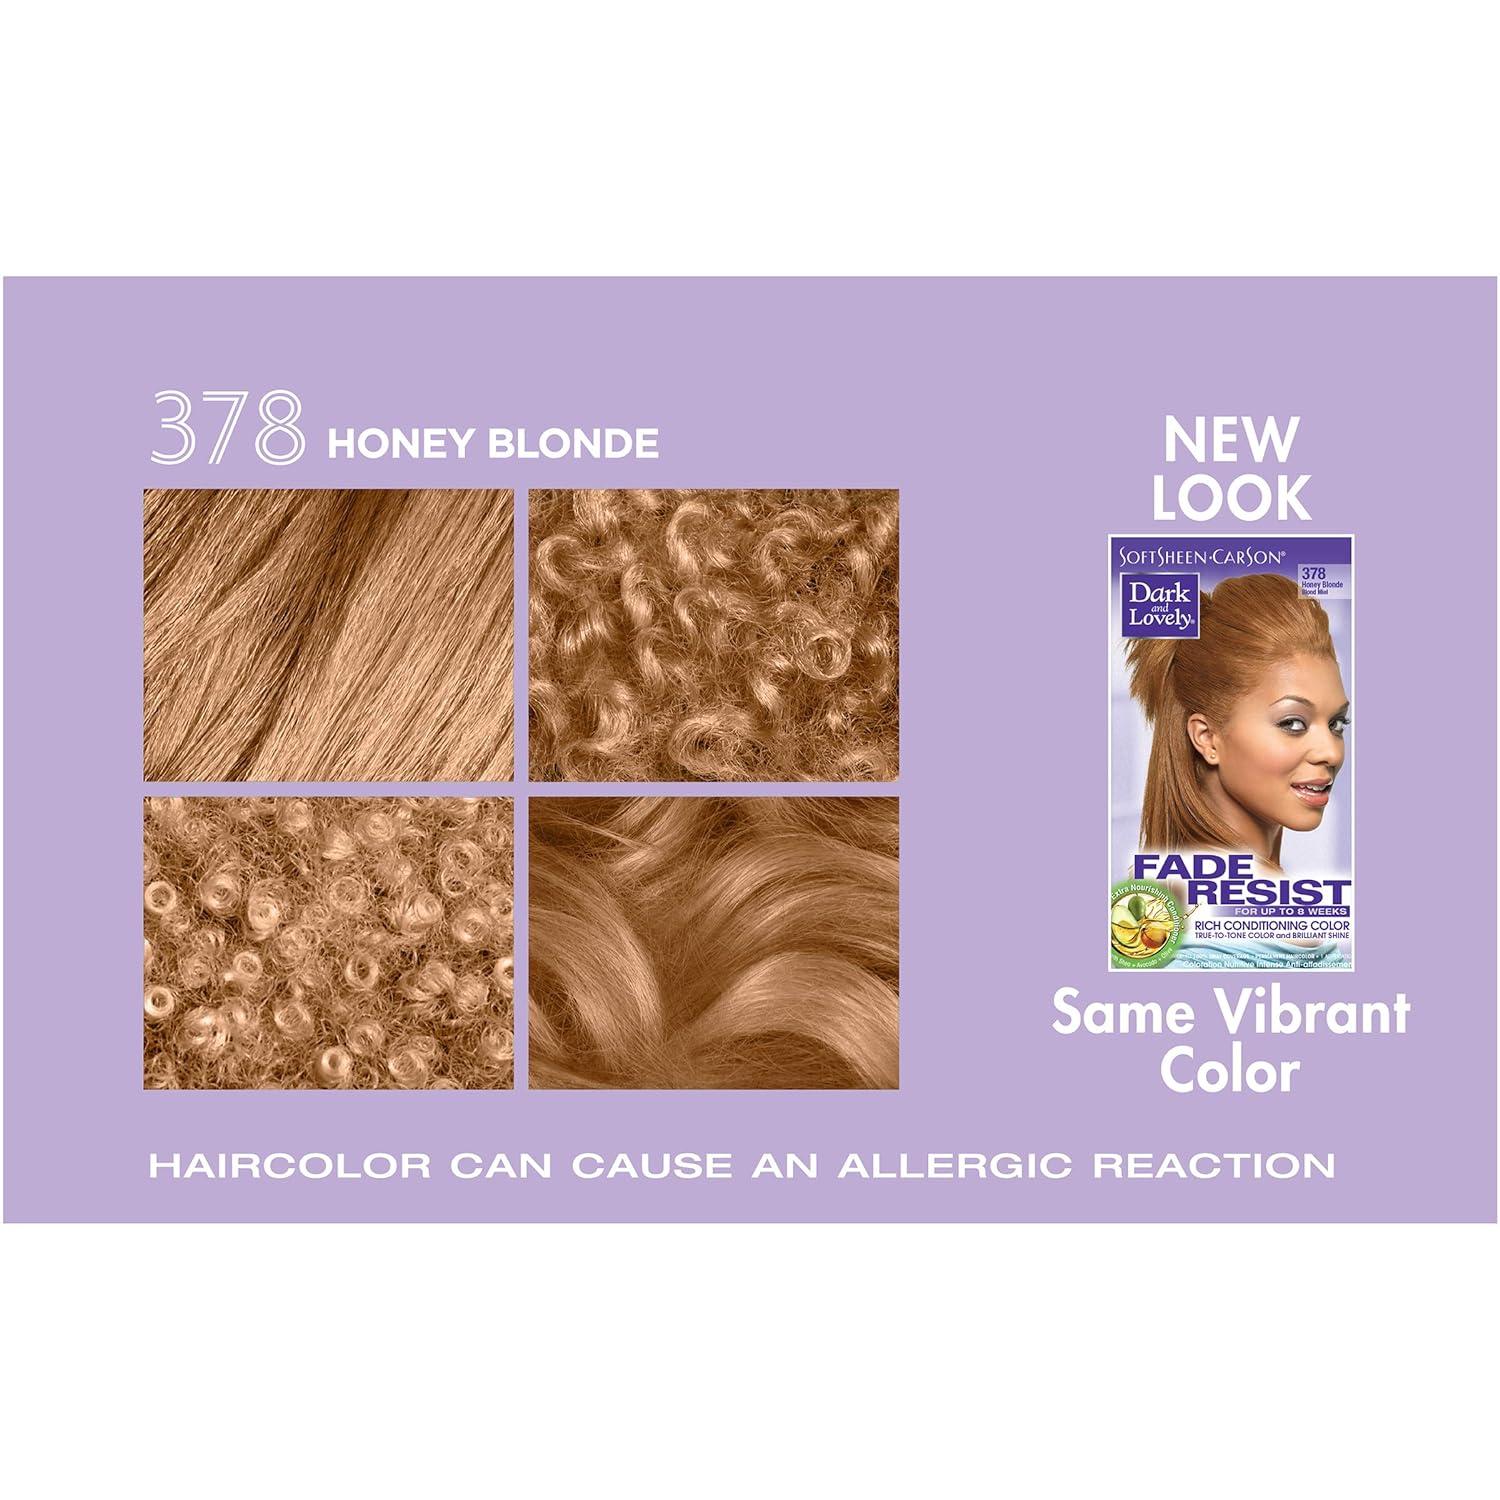 SoftSheen-Carson Dark and Lovely Fade Resist Rich Conditioning Hair Color  Permanent Hair Color Up To 100 percent Gray Coverage Brilliant Shine with  Argan Oil and Vitamin E Honey Blonde Honey Blonde 378